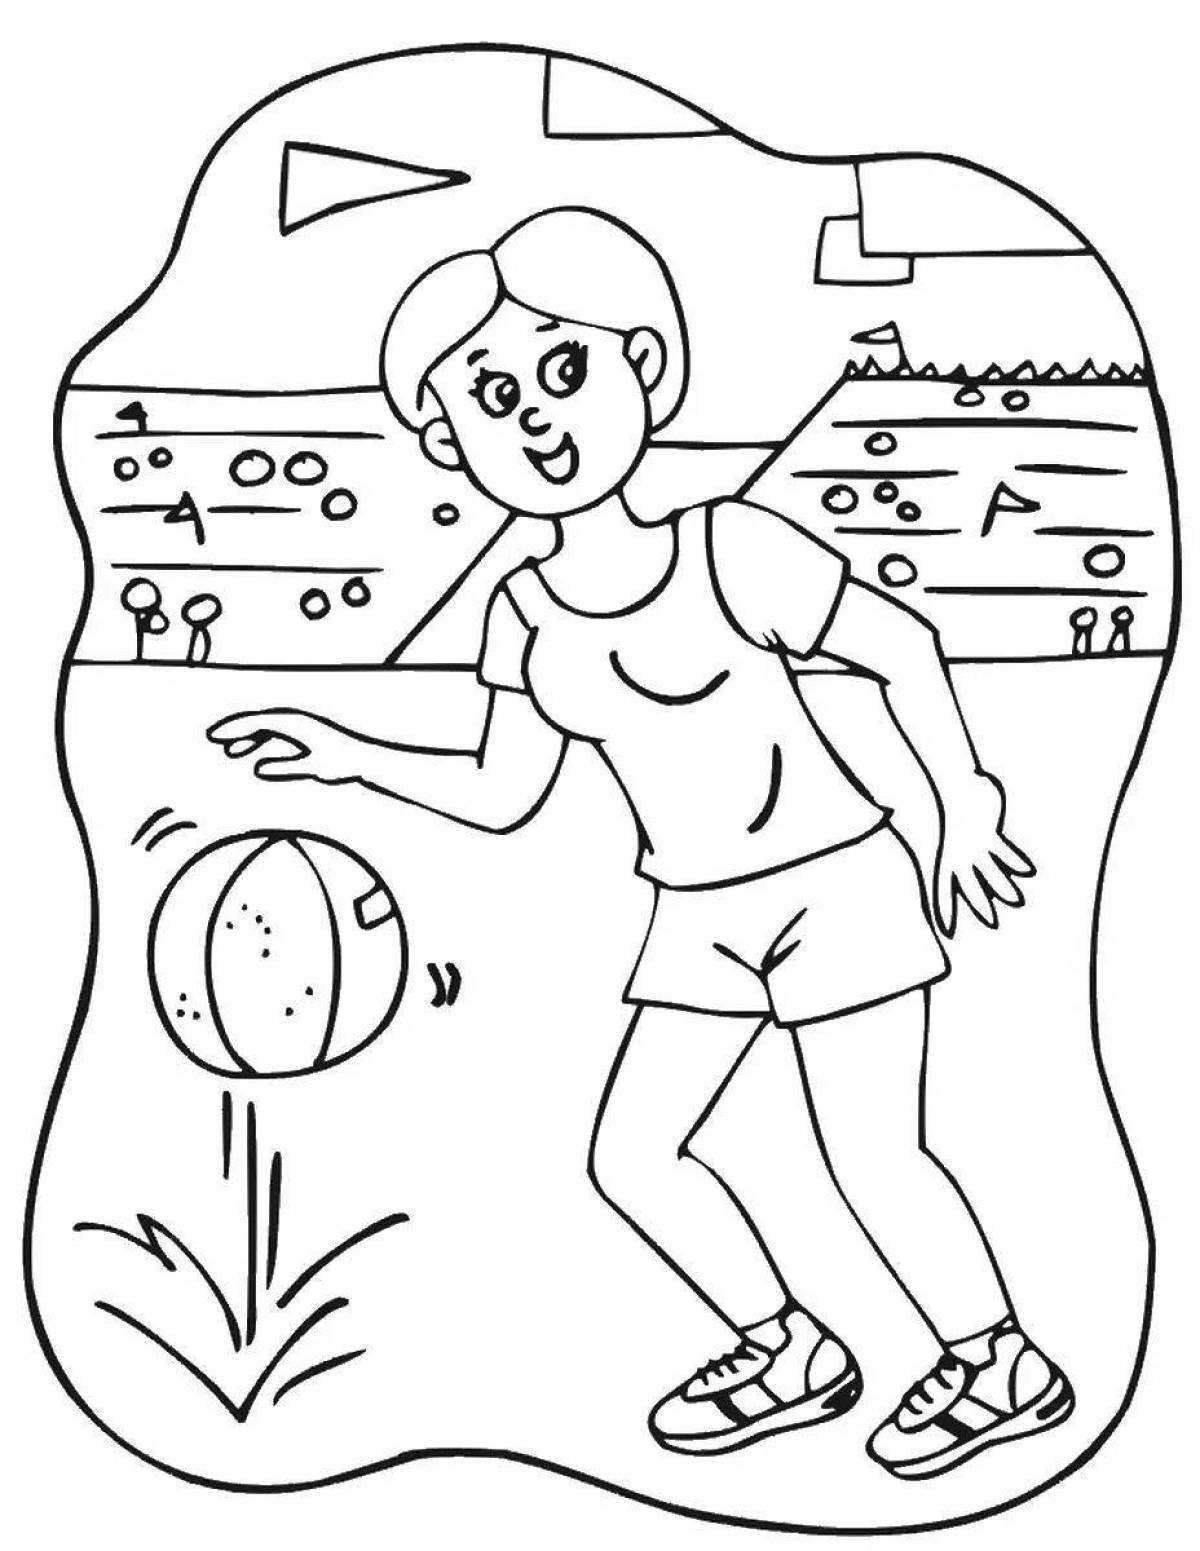 Fun coloring book health for 3-4 year olds